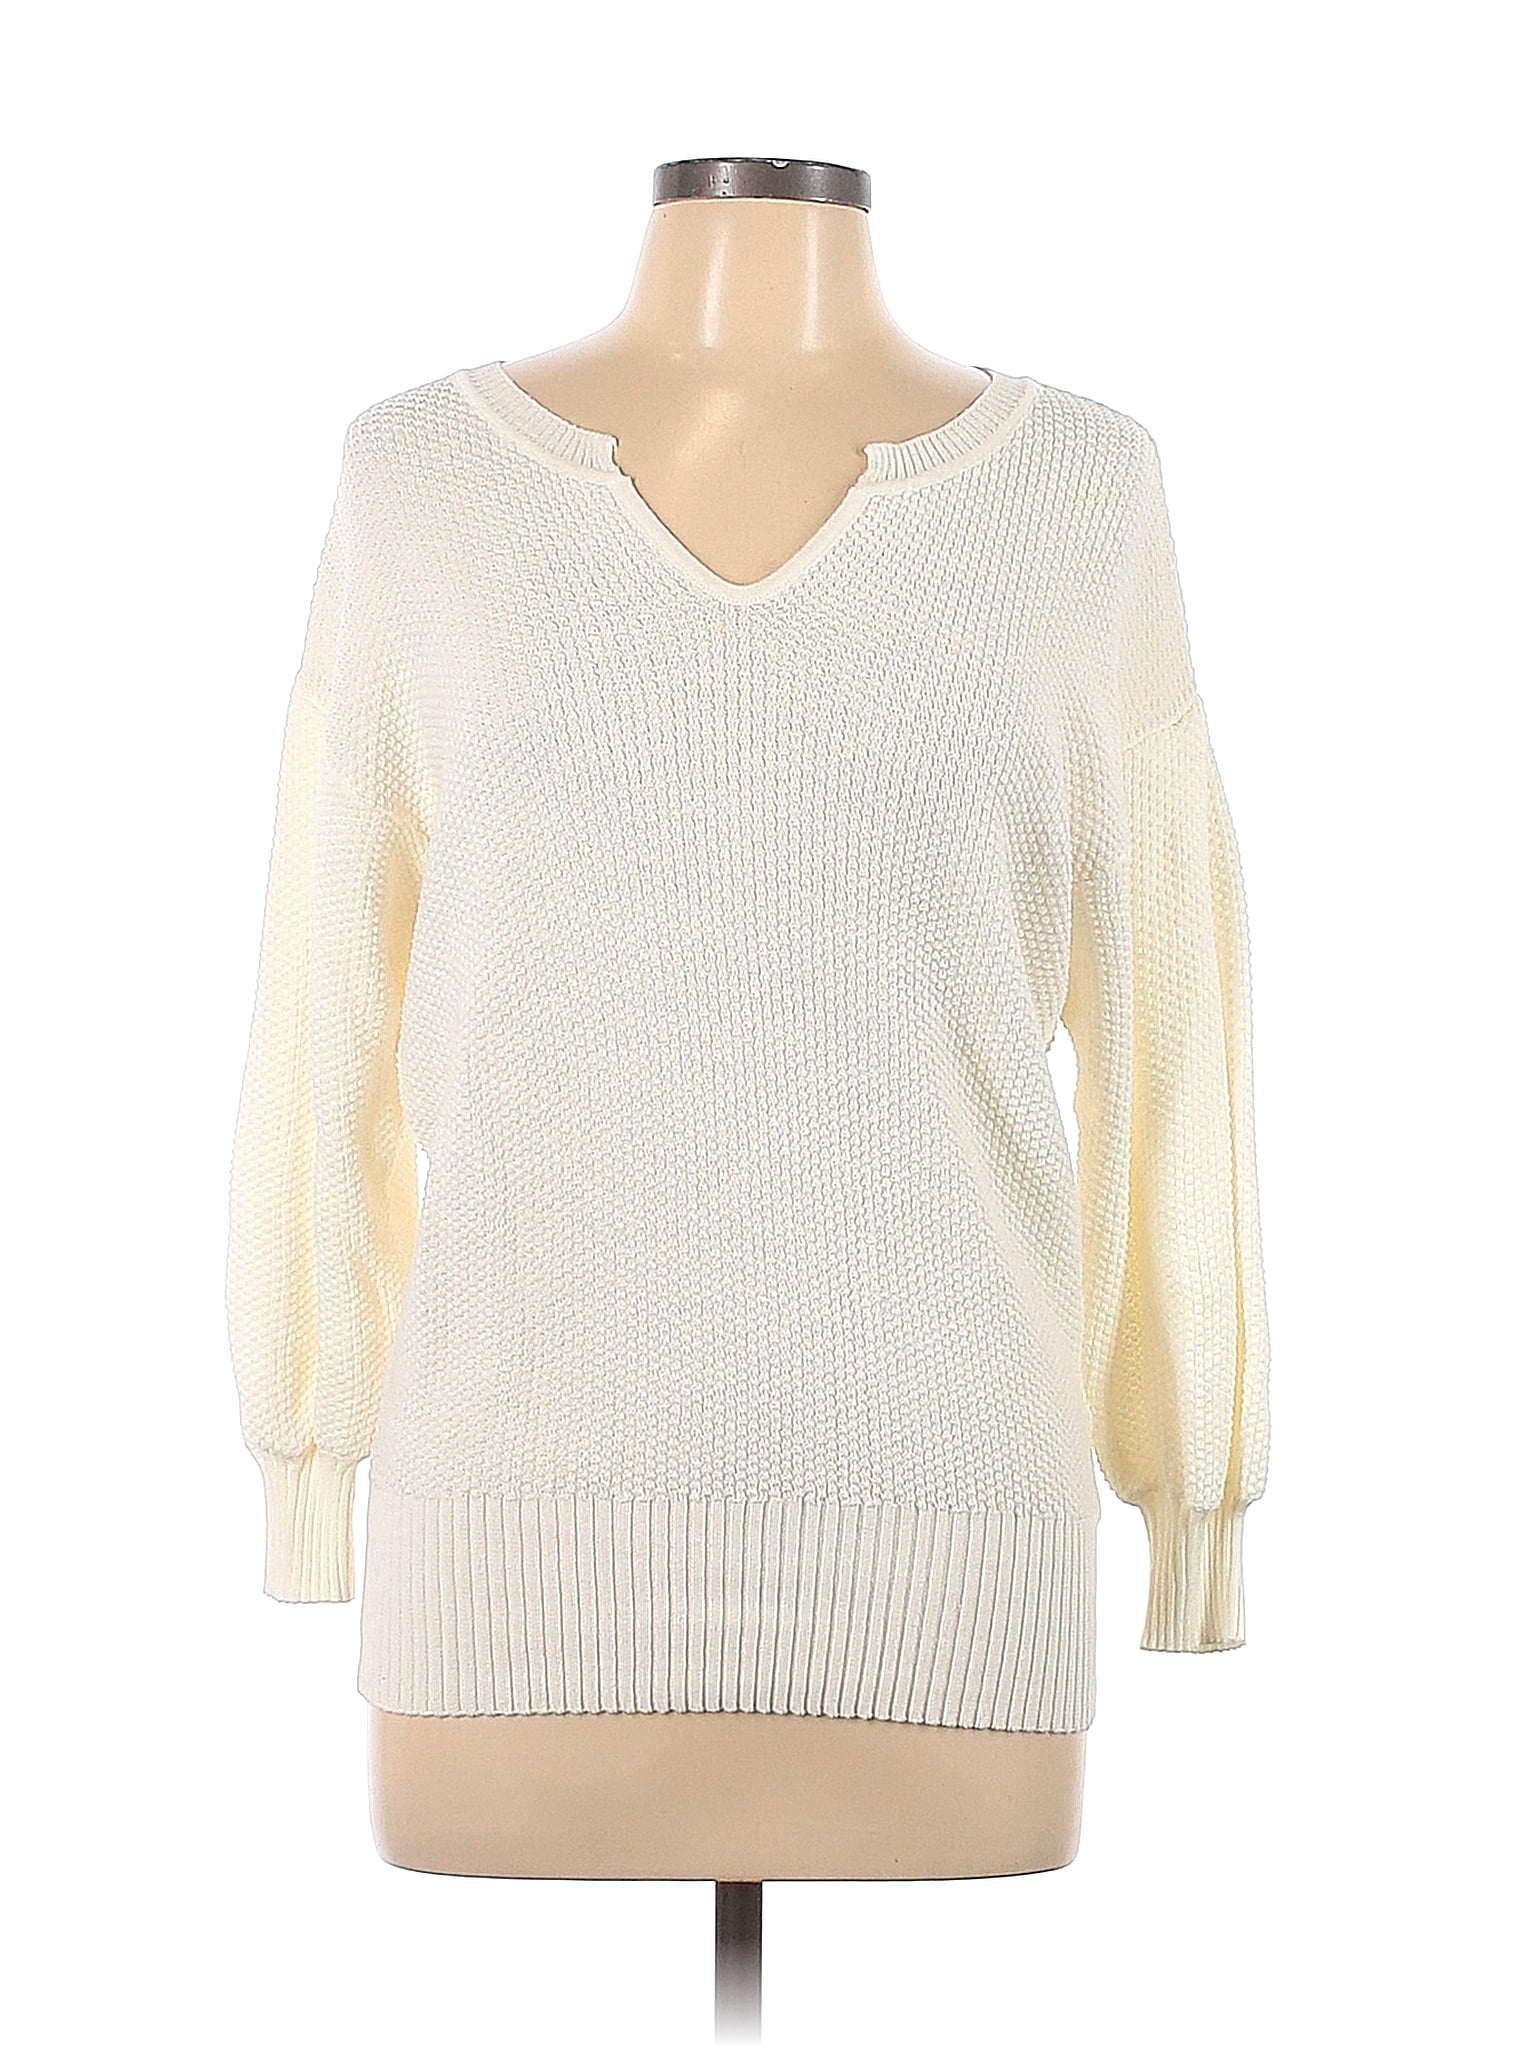 Ella Moss Color Block Solid Ivory White Pullover Sweater Size L - 82% ...